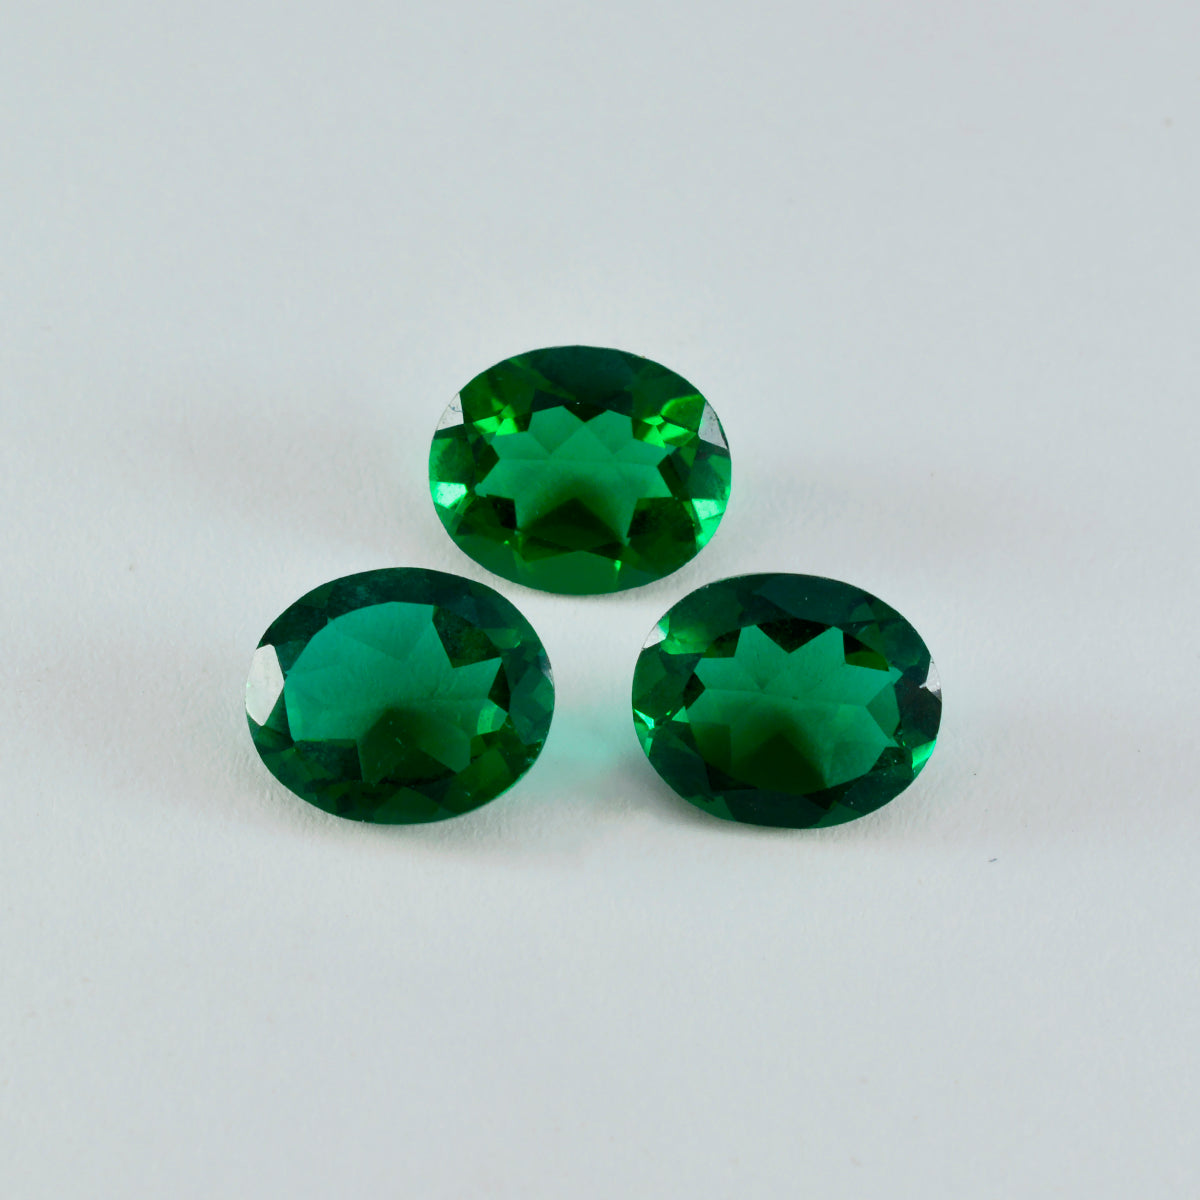 Riyogems 1PC Green Emerald CZ Faceted 10x12 mm Oval Shape excellent Quality Gemstone